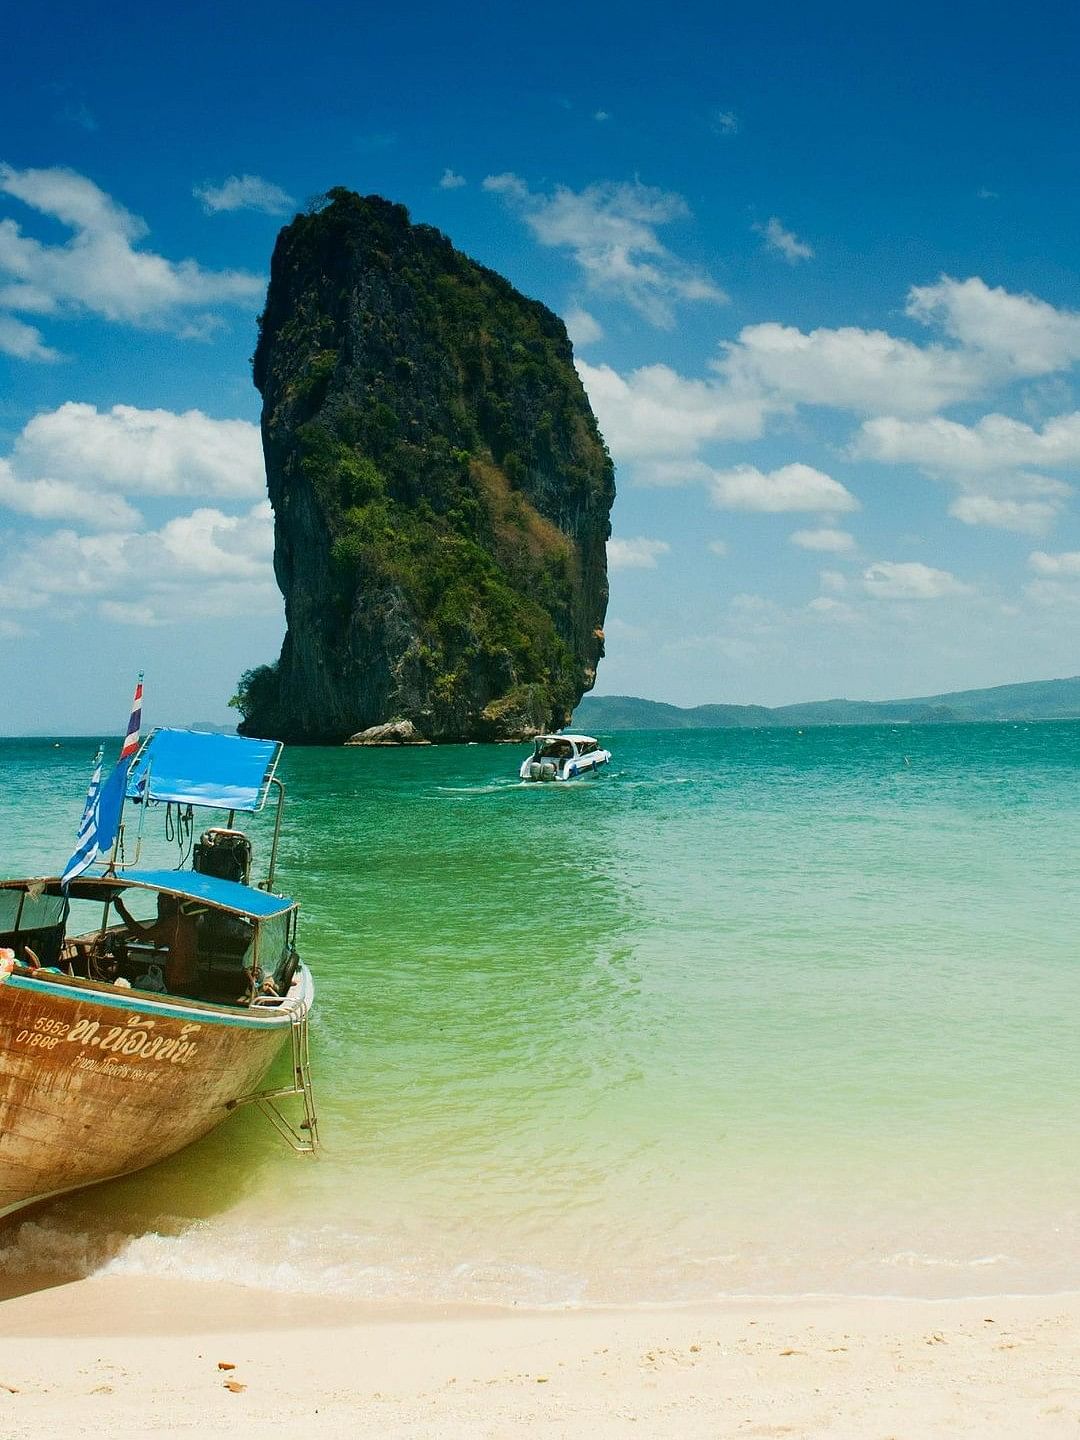 Thailand boasts of stunning beaches and islands that attract visitors from around the globe. The country has made significant strides in promoting sustainable ocean tourism.